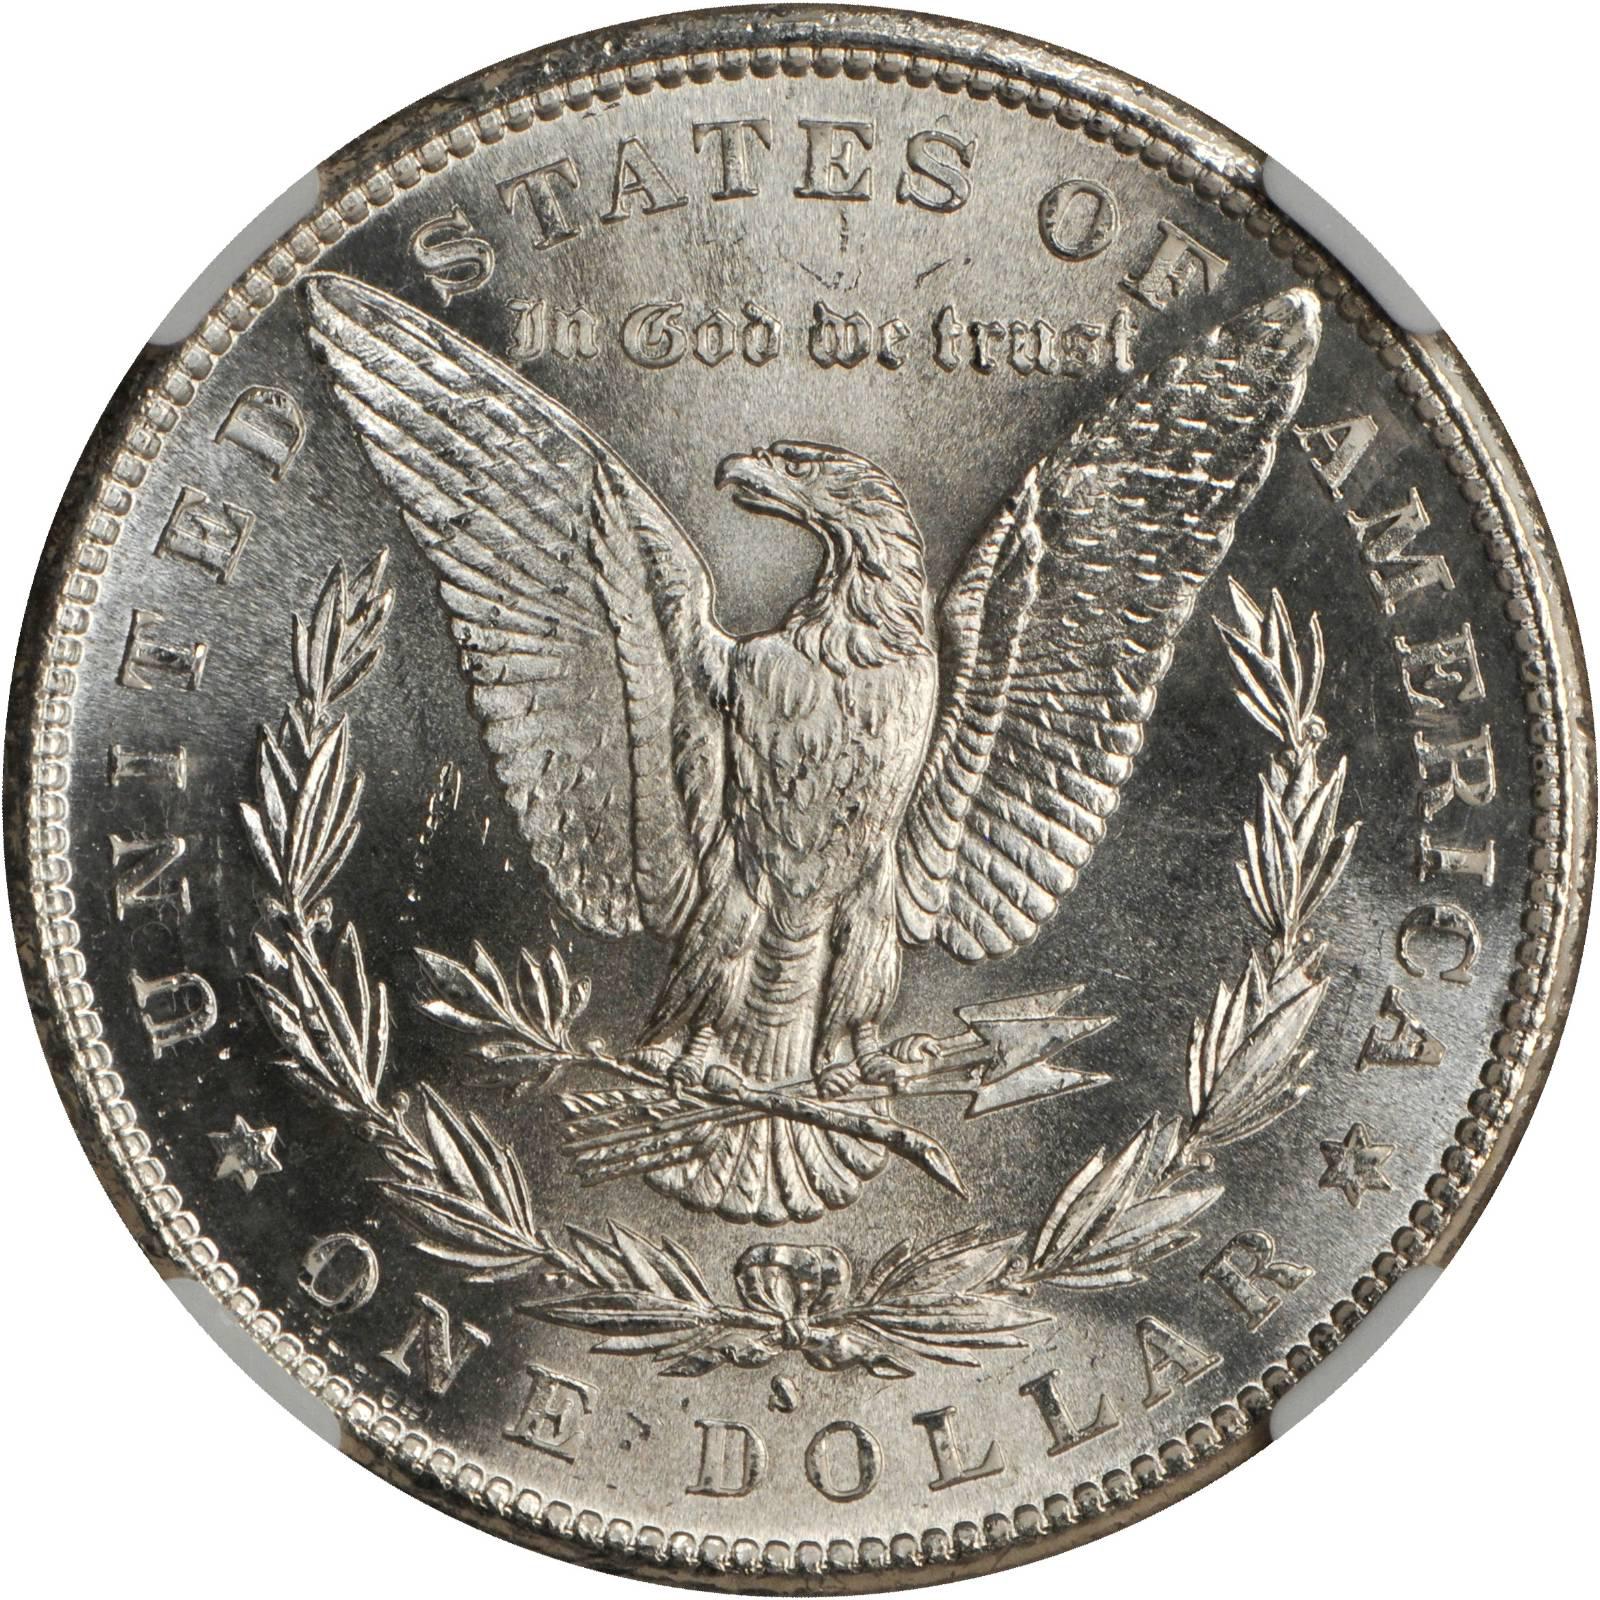 Value Of 1881 S Morgan Dollar Rare Silver Dollar Buyers,What Temp To Cook Chicken